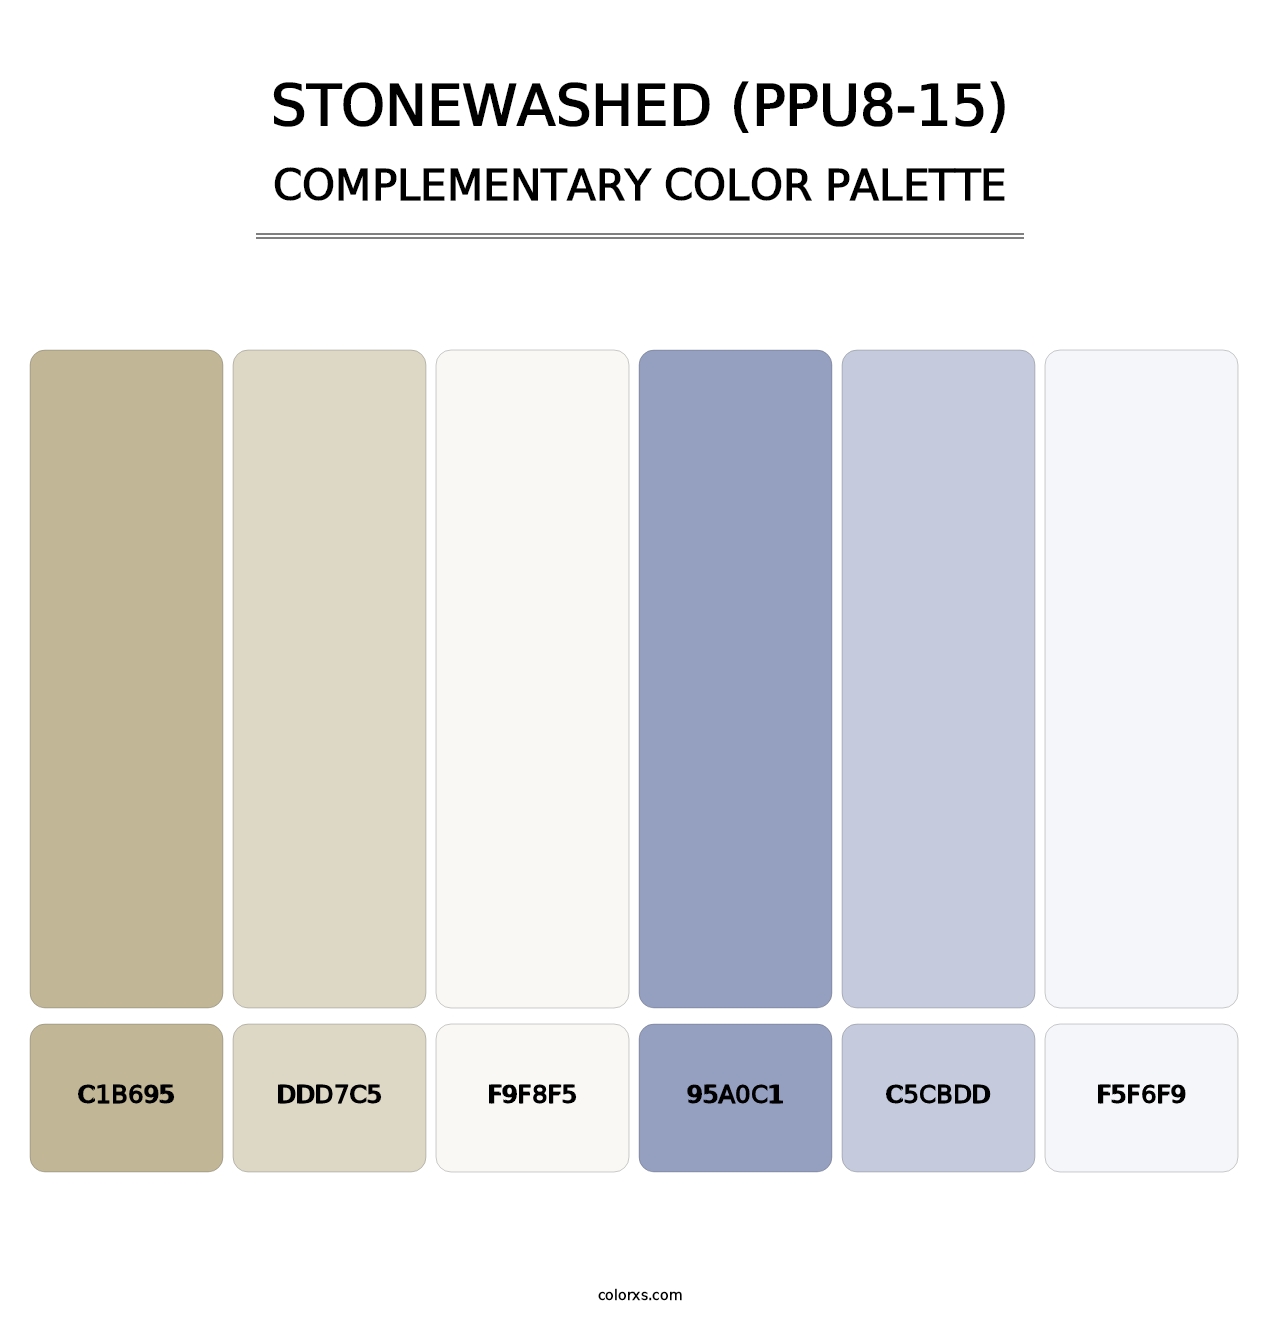 Stonewashed (PPU8-15) - Complementary Color Palette